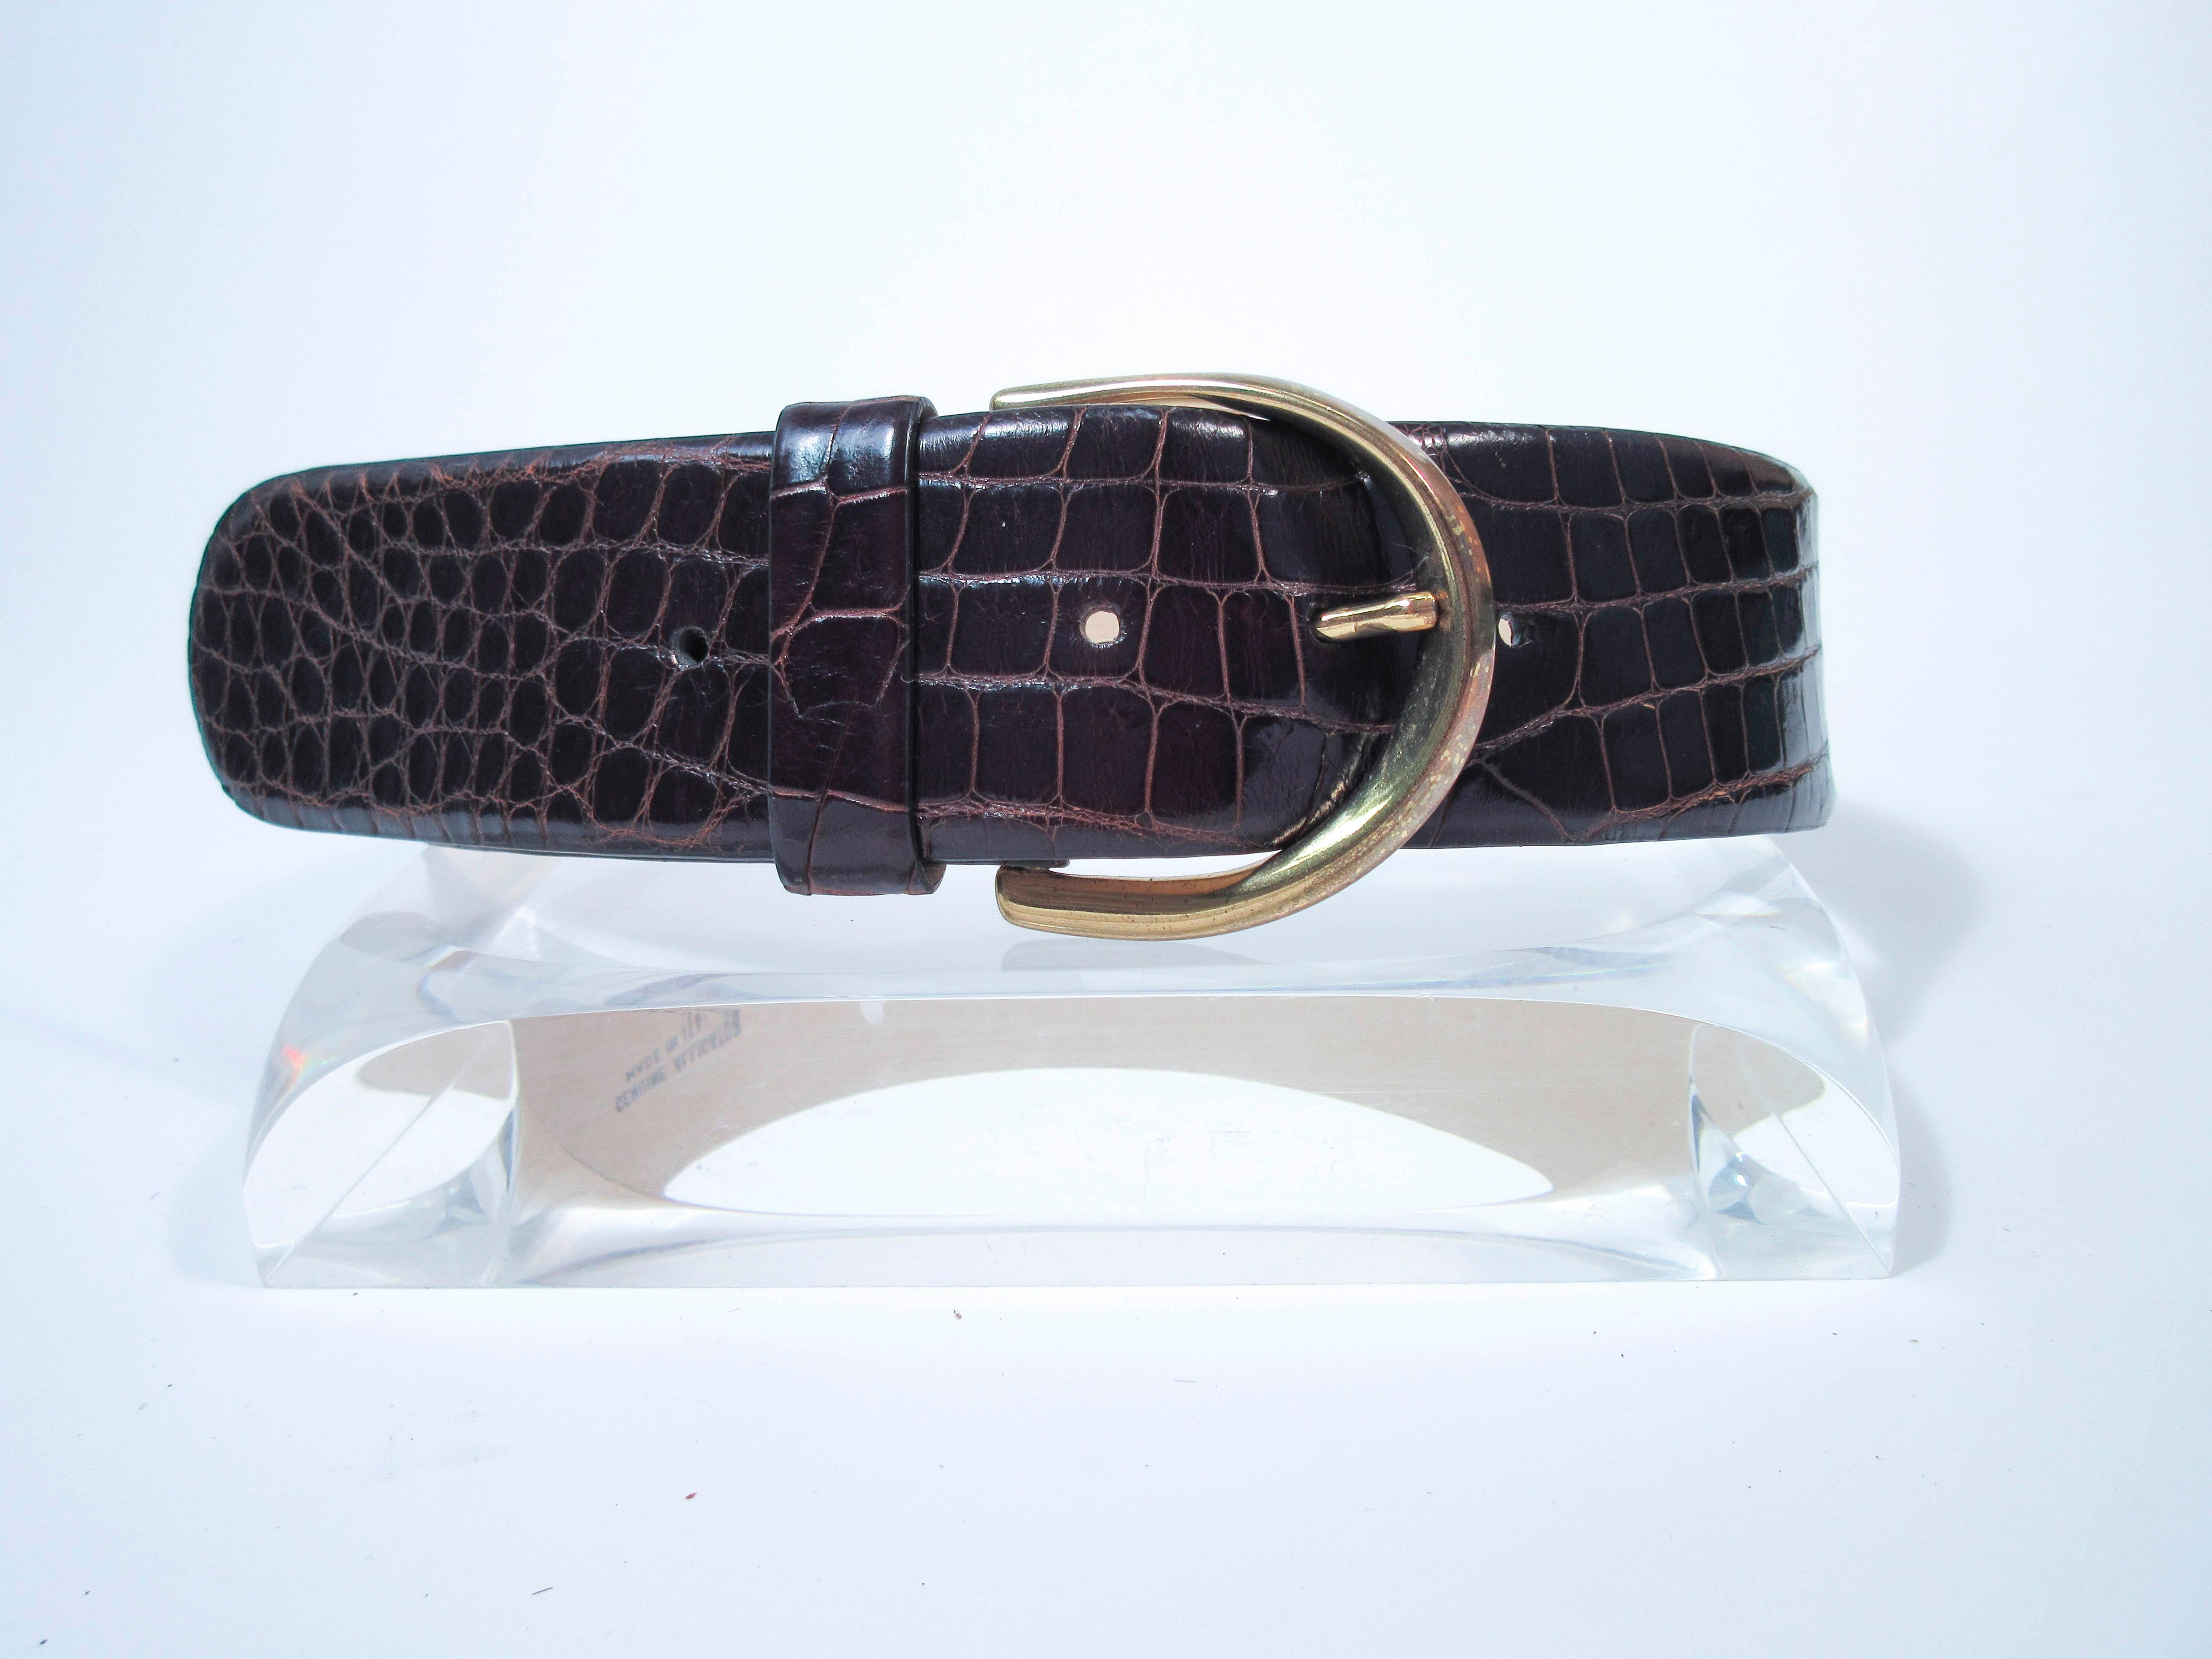 This Donna Karan belt is composed of a brown alligator. Features a classic wide style high waist style with gold tone hardware. This is a fantastic statement piece and excellent addition to any collectors wardrobe. In excellent pre-owned condition